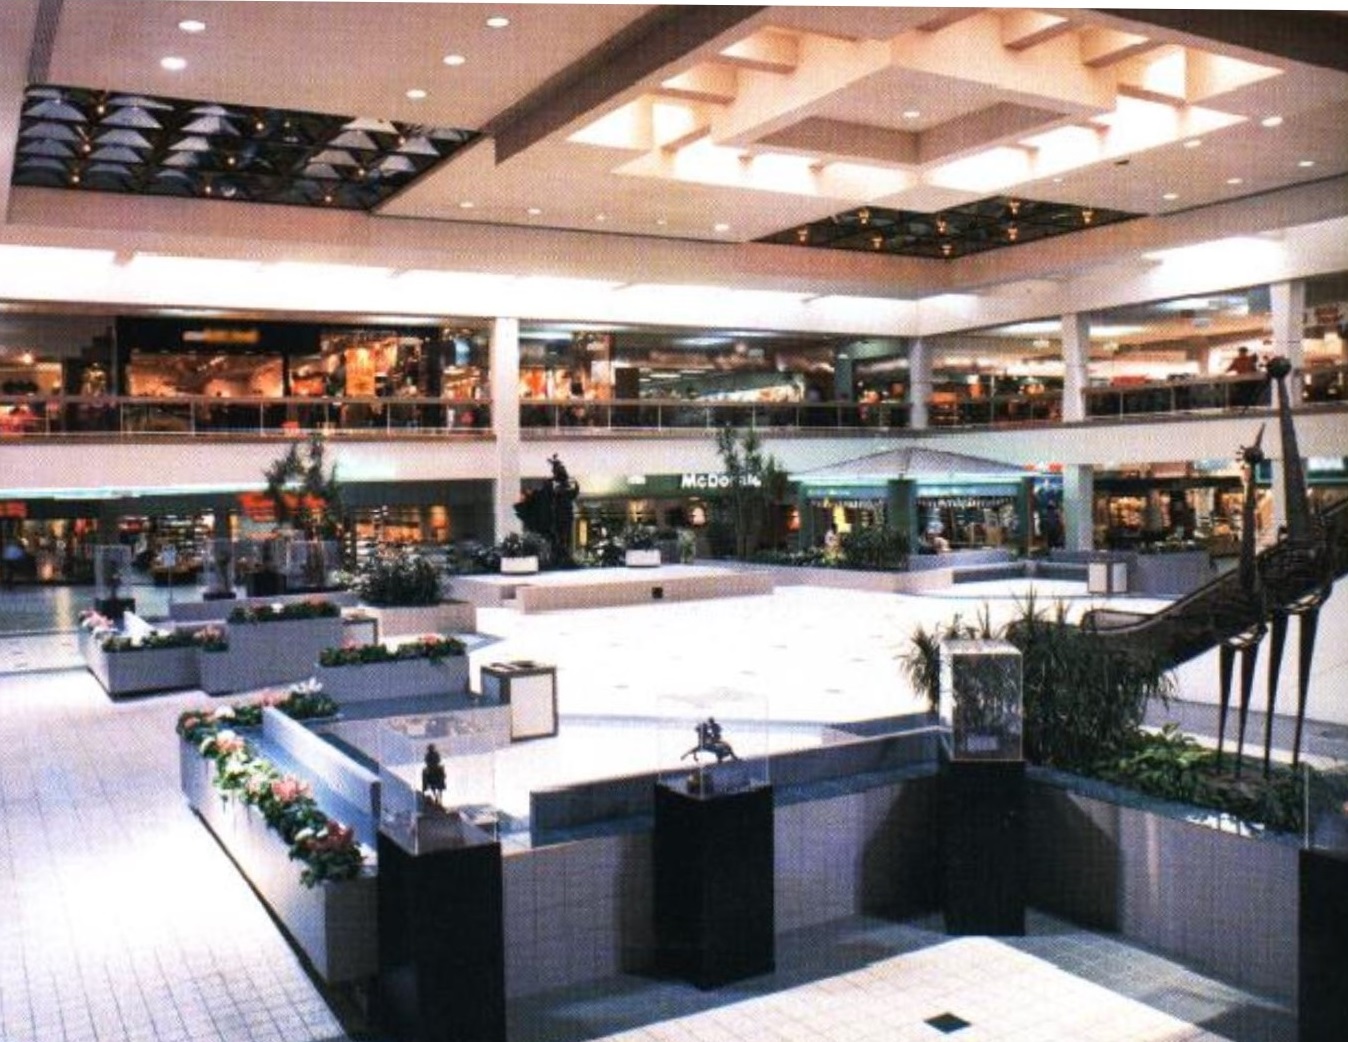 Carson's Louis Joliet Mall, Originally opened as a Bergners…